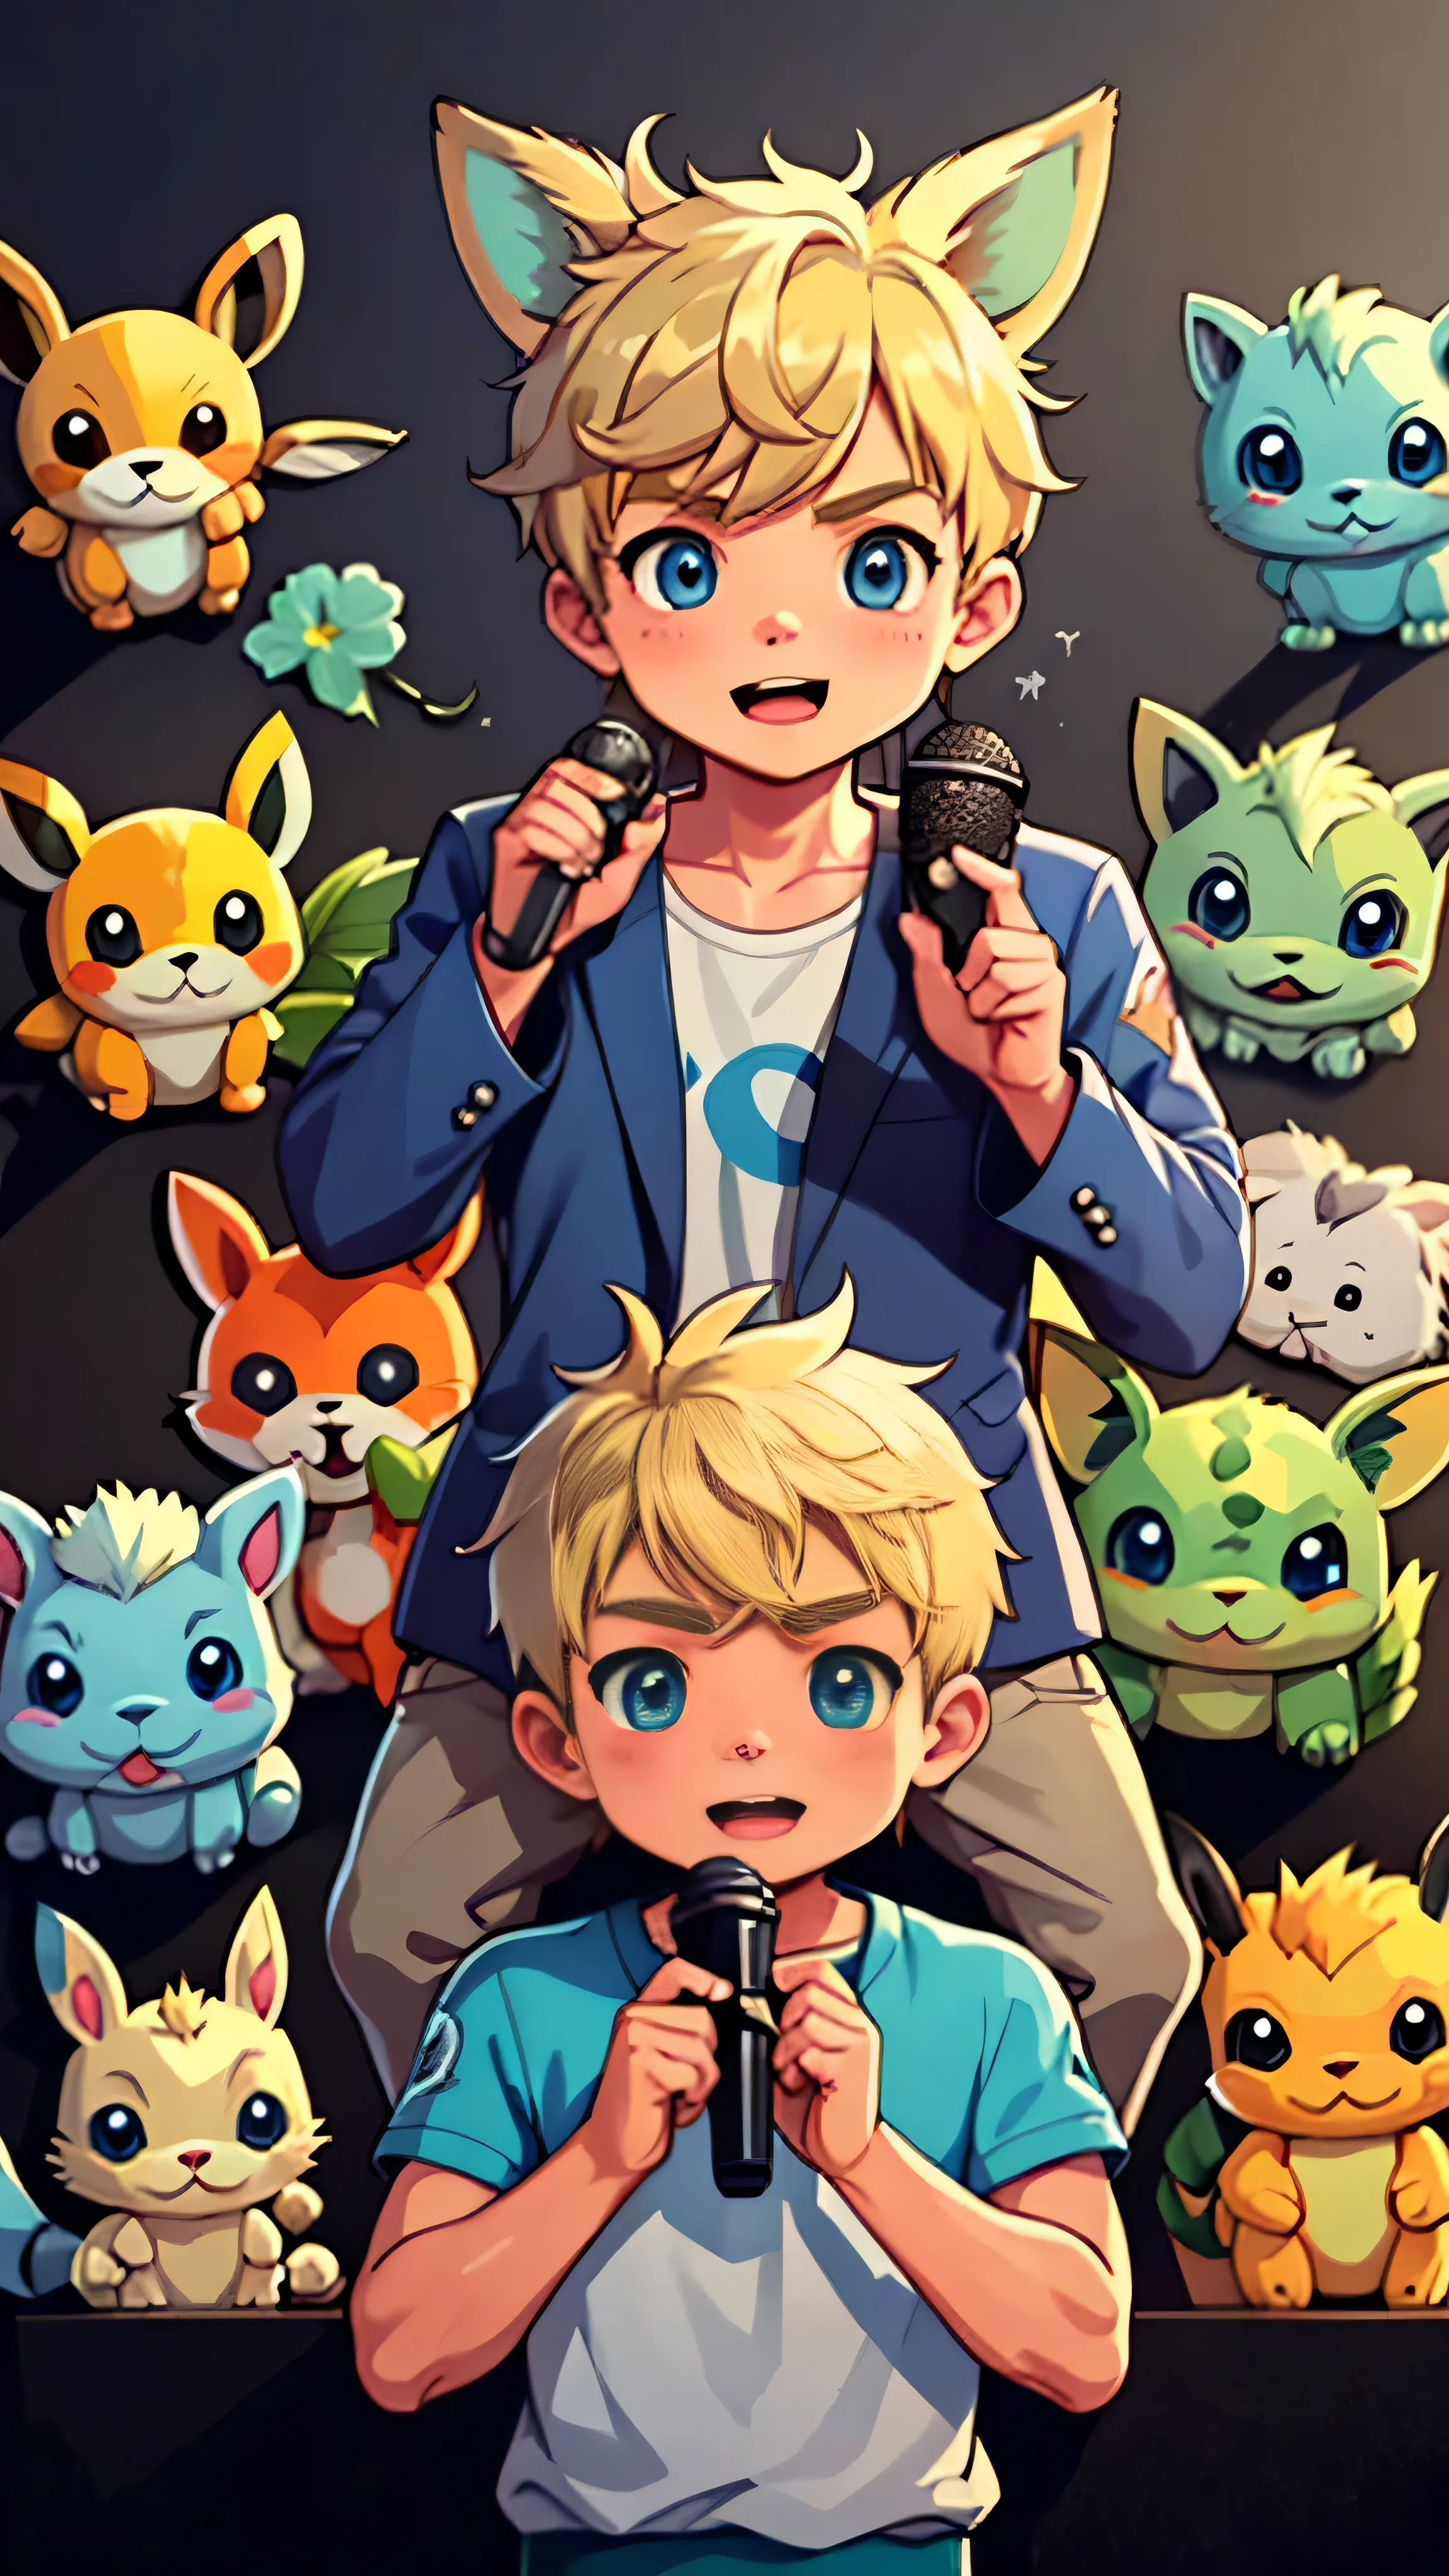 masterpiece, best quality, high-definition, RO1, Male focus, Blonde hair, Detailed face, Detailed eyes, Specular highlights, 1 boy, Steve Irwin, Holding a microphone, Speaking to a crowd, Pikachu, Vaporeon, Jolteon, and Bulbasaur on his shoulders, In a Pokemon Gym, Backdrop of a Pokemon Gym.